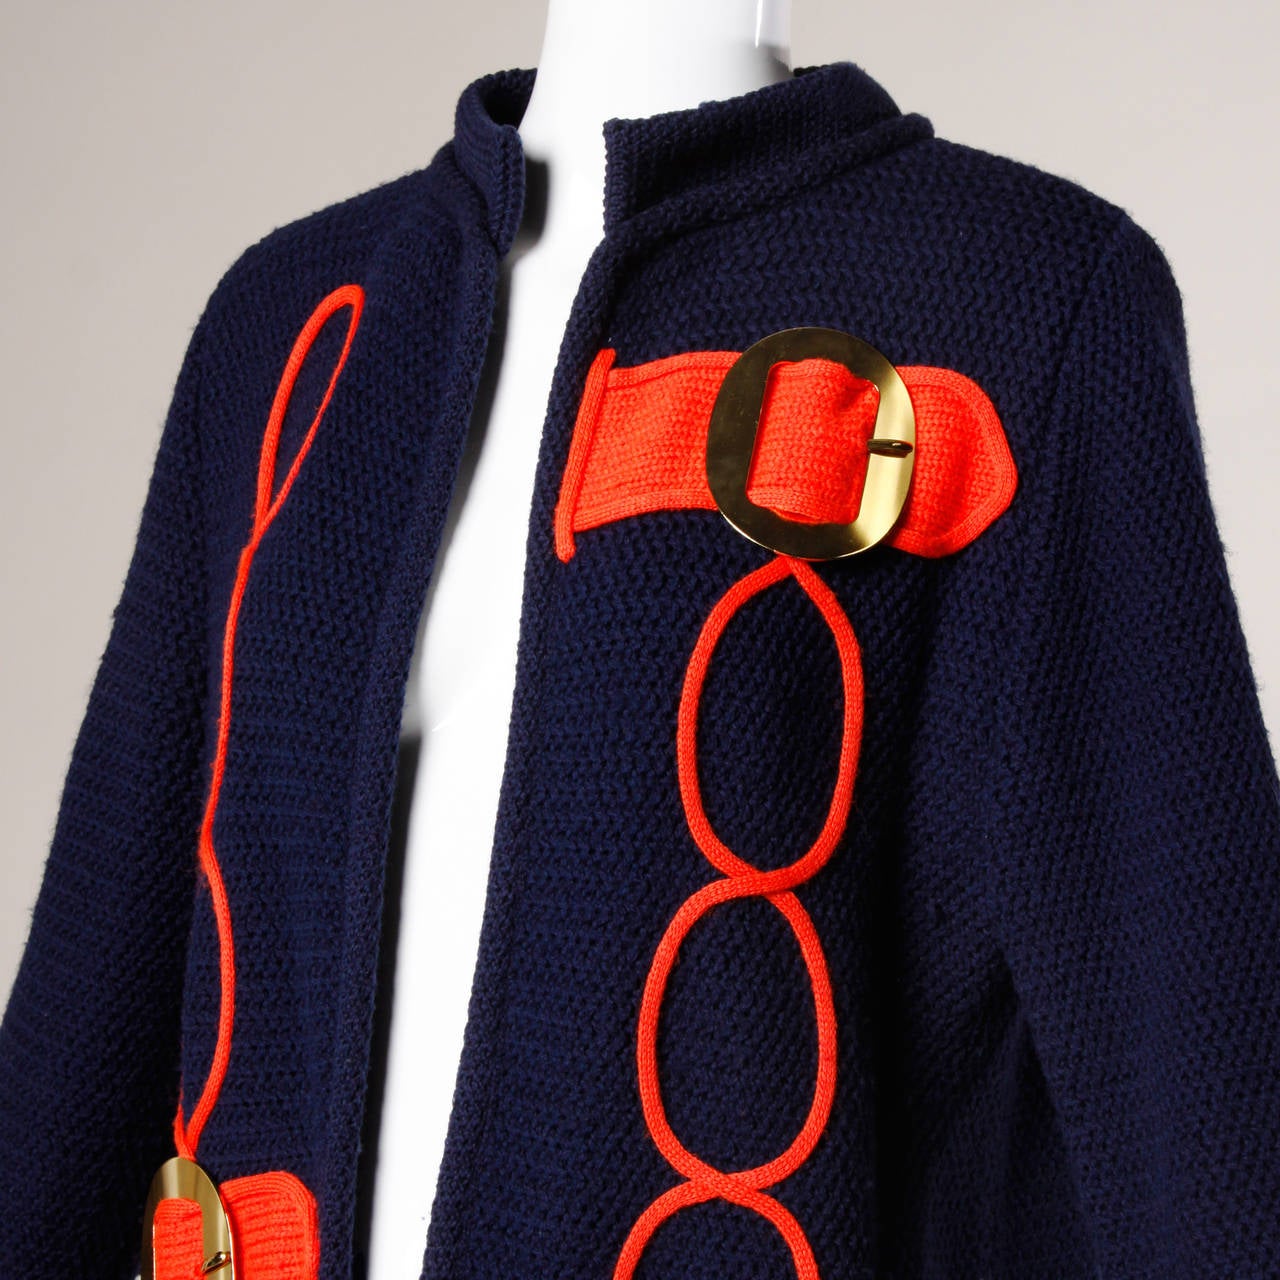 Vintage red and navy wool cardigan sweater with mod buckles and design by Ethel Beverly Hills.

Details:

Unlined
No Closure
Marked Size: Not Marked
Estimated Size: Medium
Color: Bright Red/ Navy/ Gold Metallic
Fabric: Wool
Label: